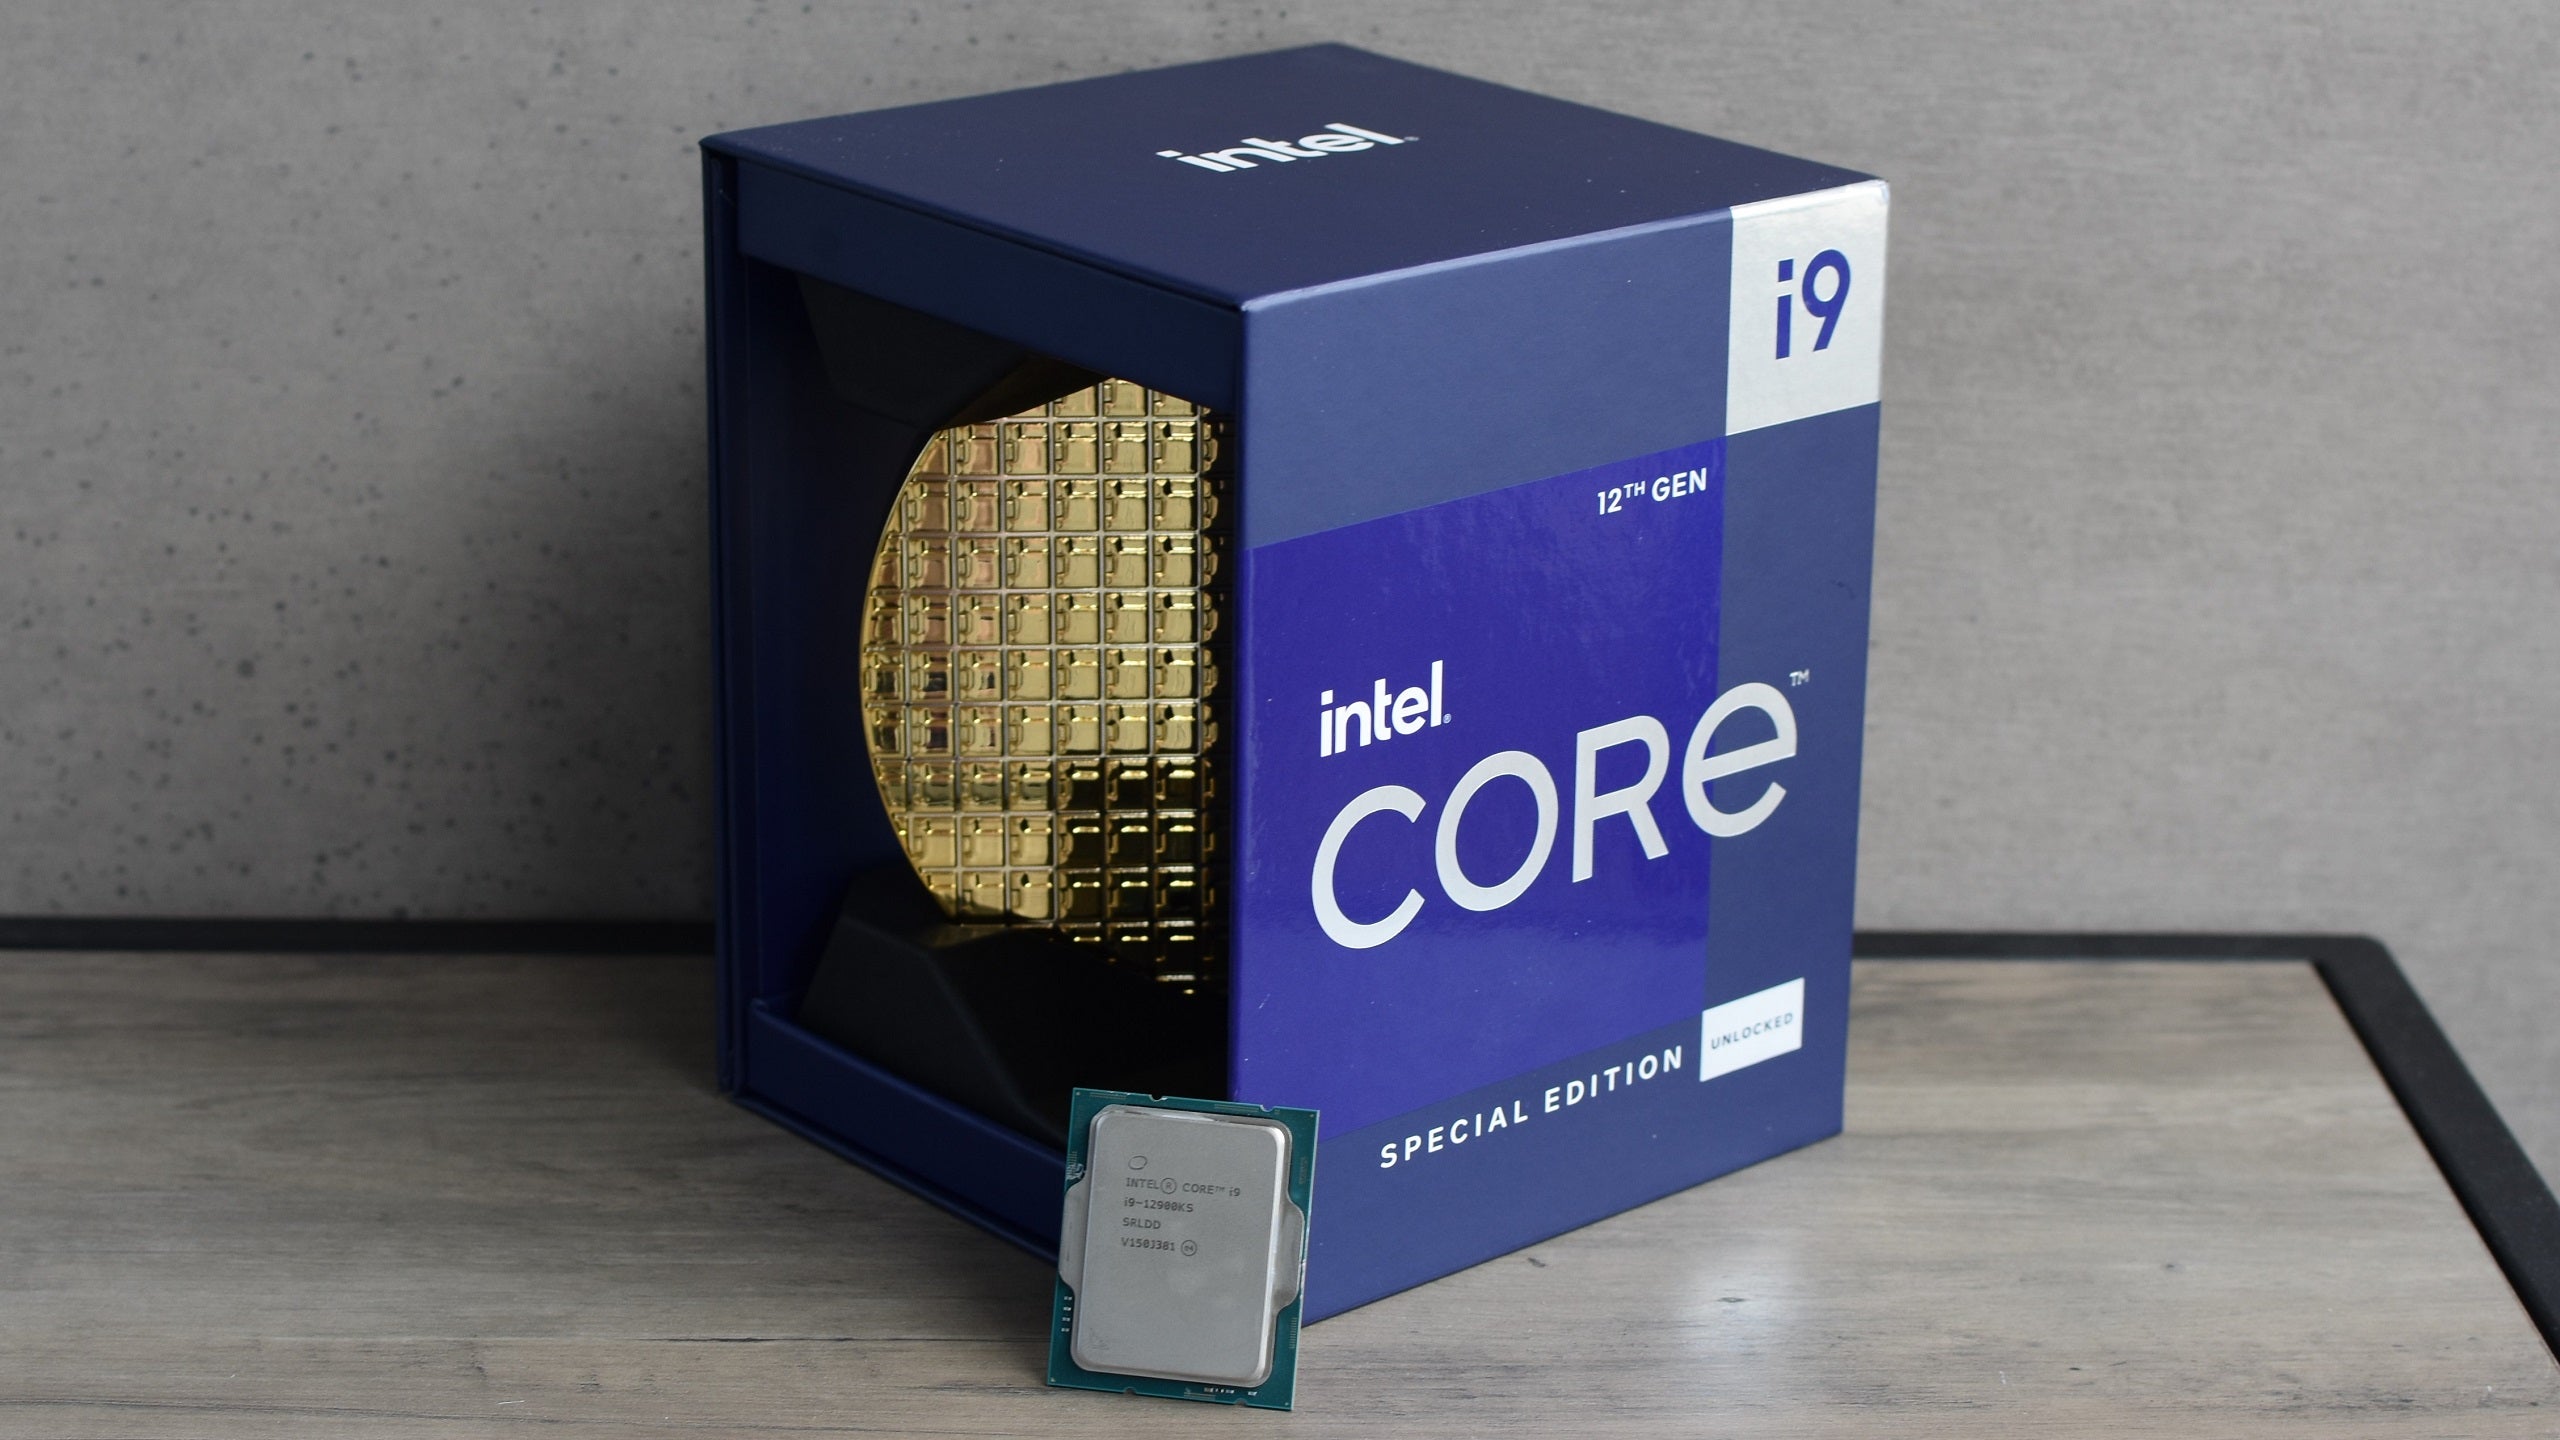 Intel Core iKS review: Intel's fastest gaming CPU yet